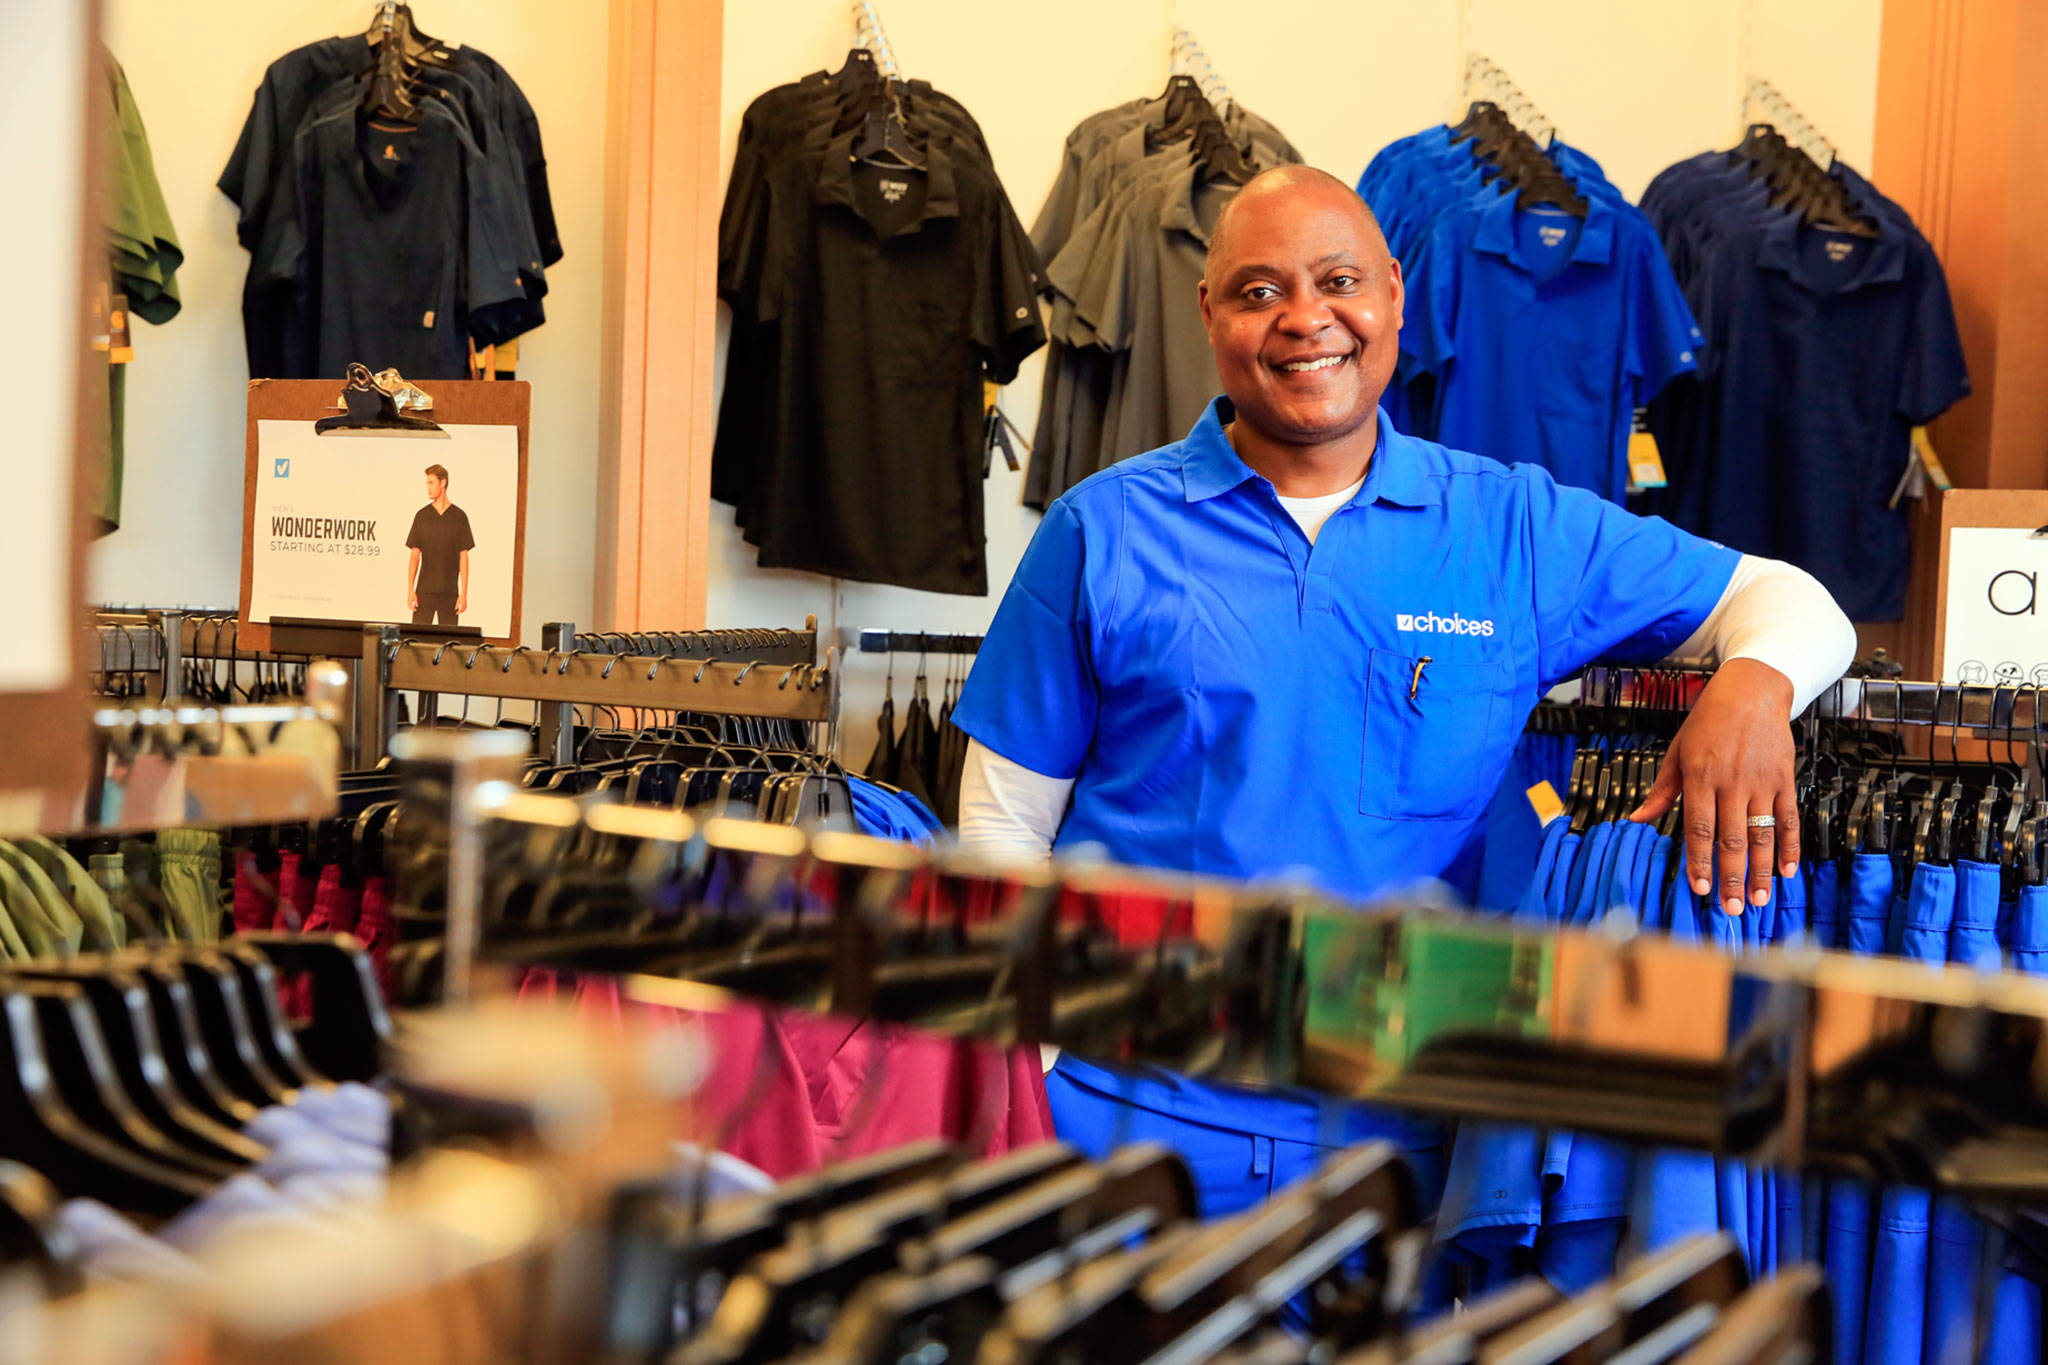 A new Everett store sells scrubs and other medical supplies